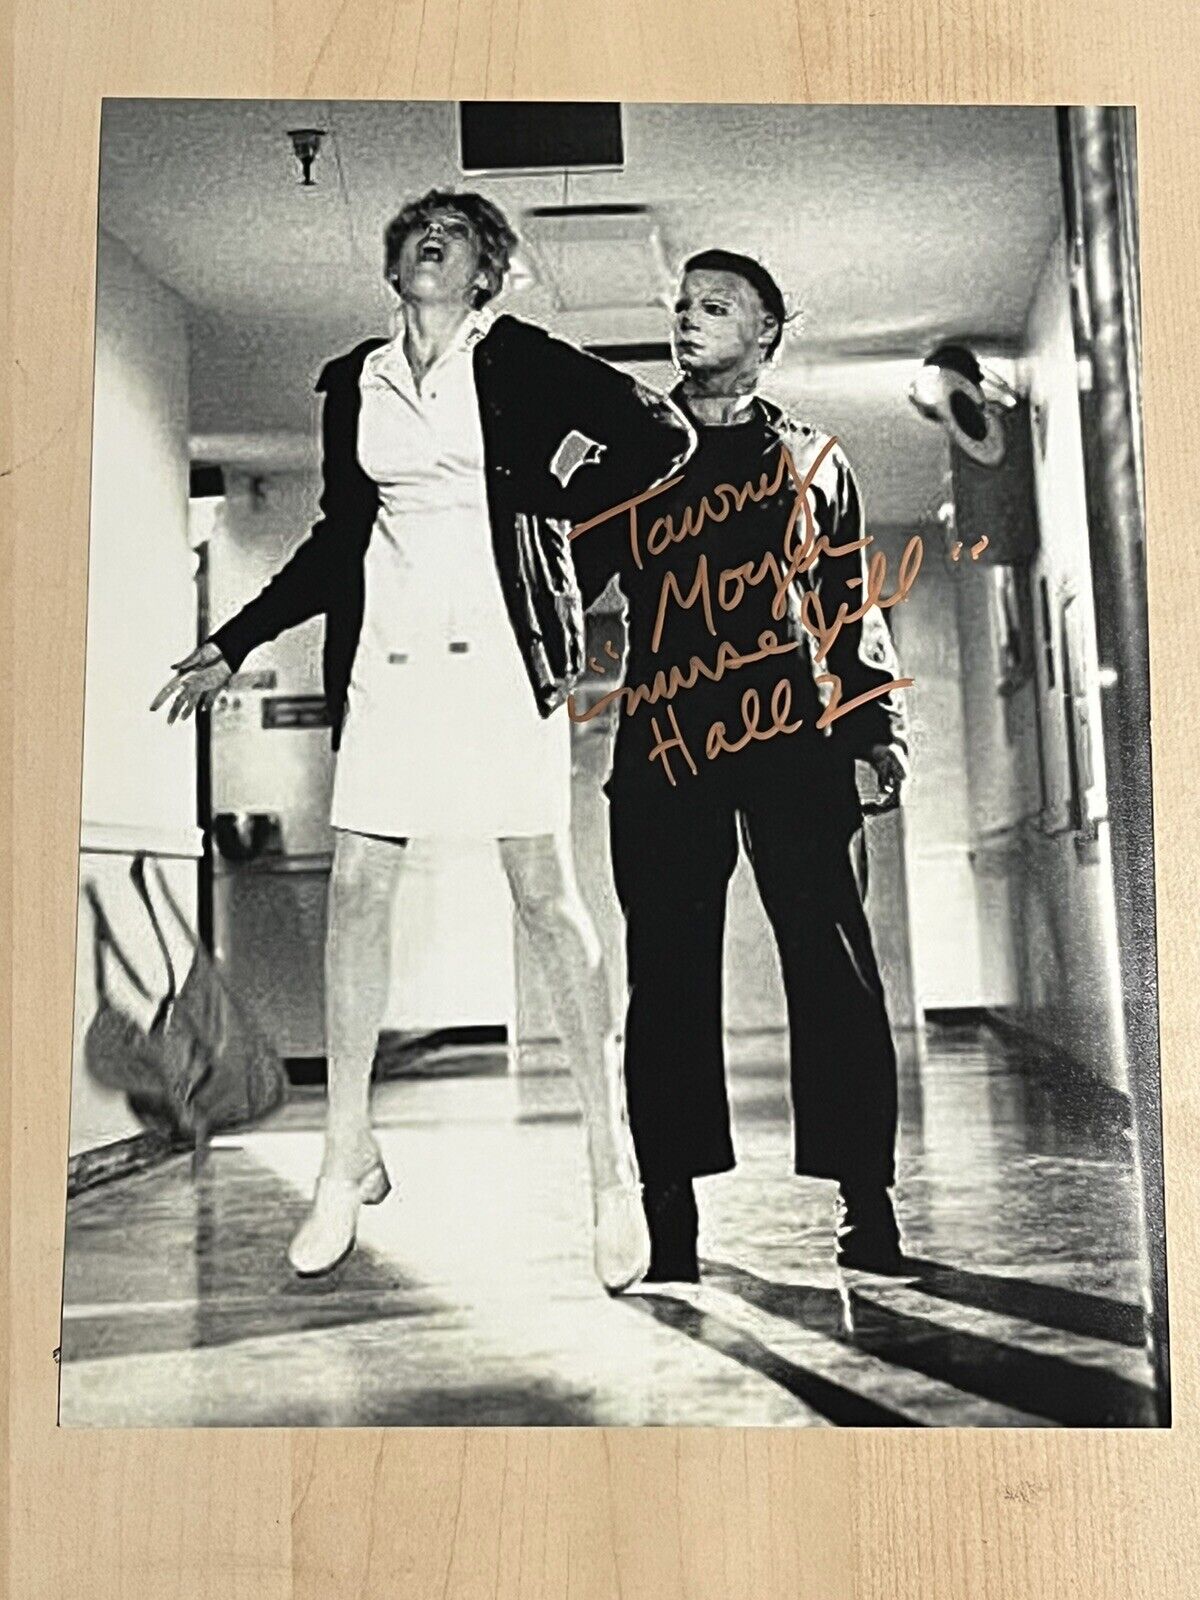 TAWNY MOYER HAND SIGNED 8x10 Photo Poster painting ACTRESS AUTOGRAPHED HALLOWEEN 2 MOVIE COA